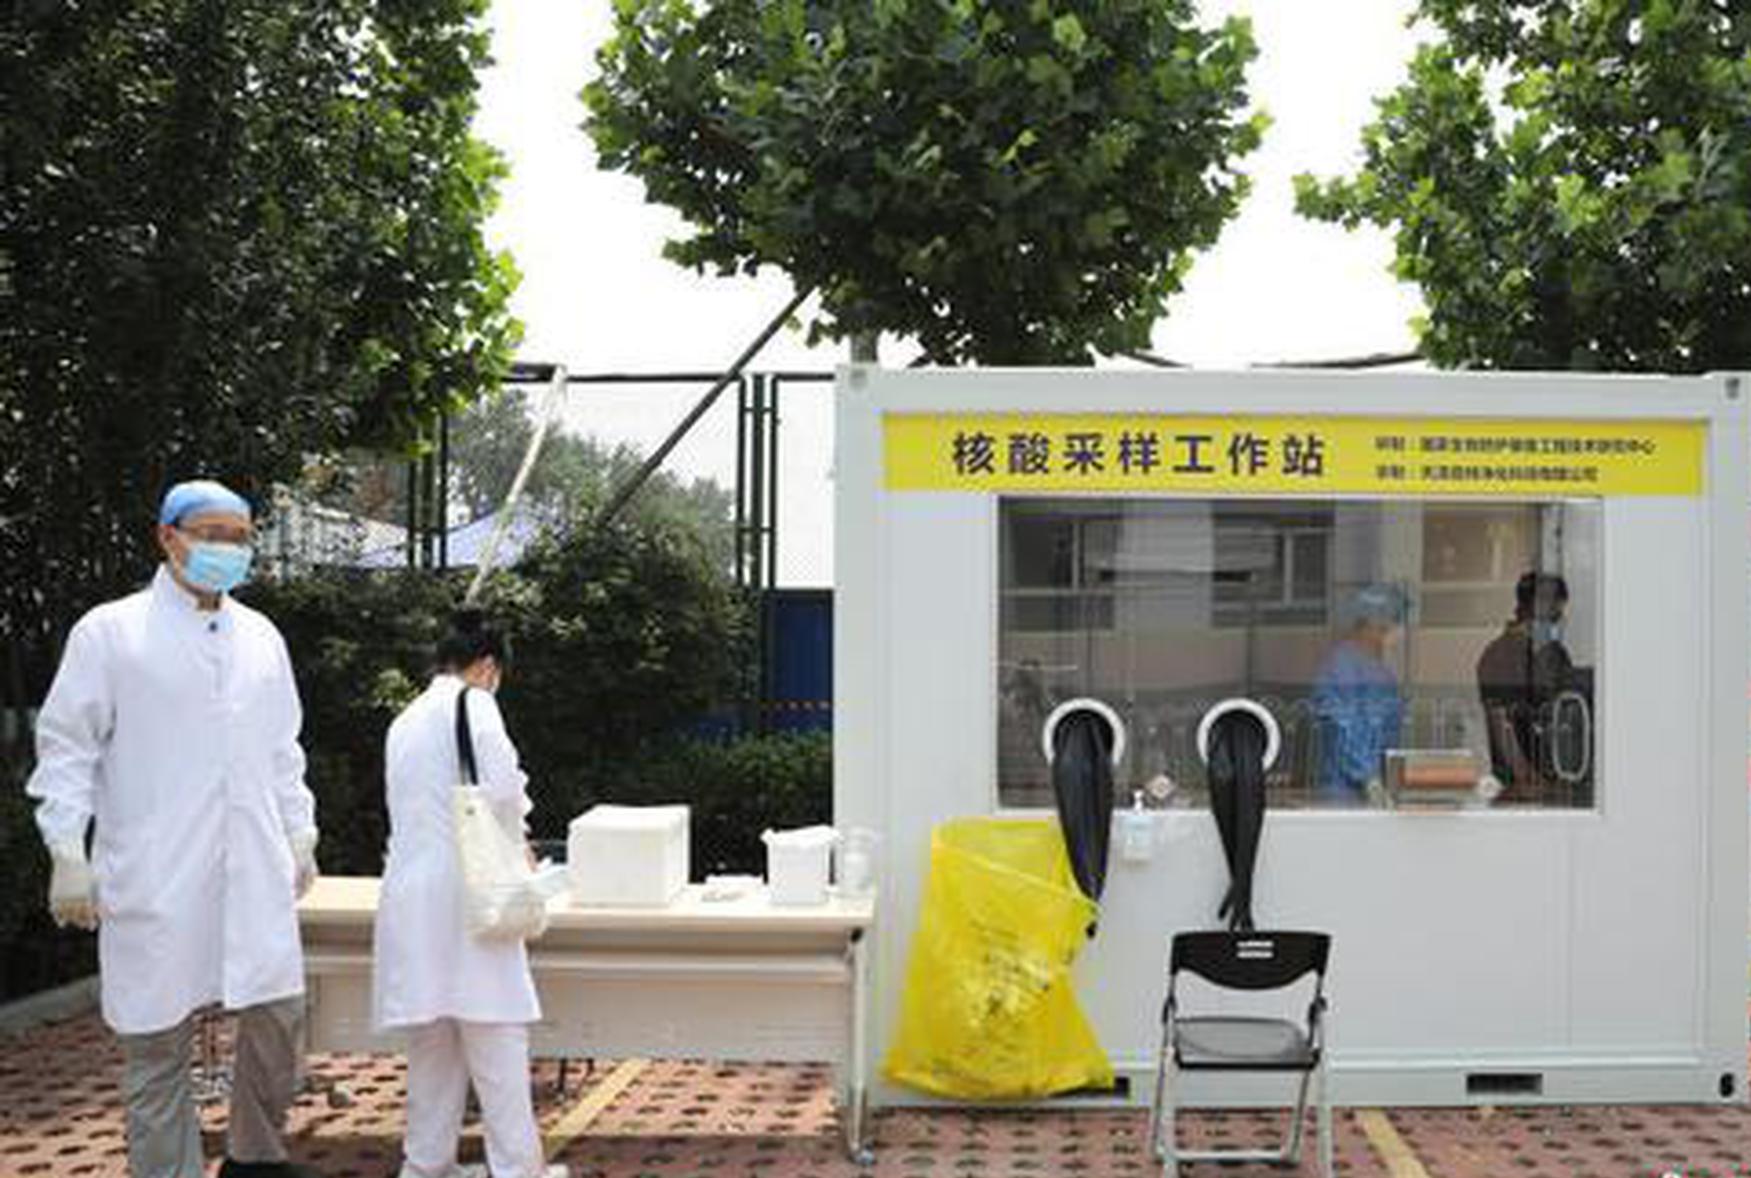 Beijing citizens suggest transforming nucleic acid testing booths into rest stations for sanitation workers